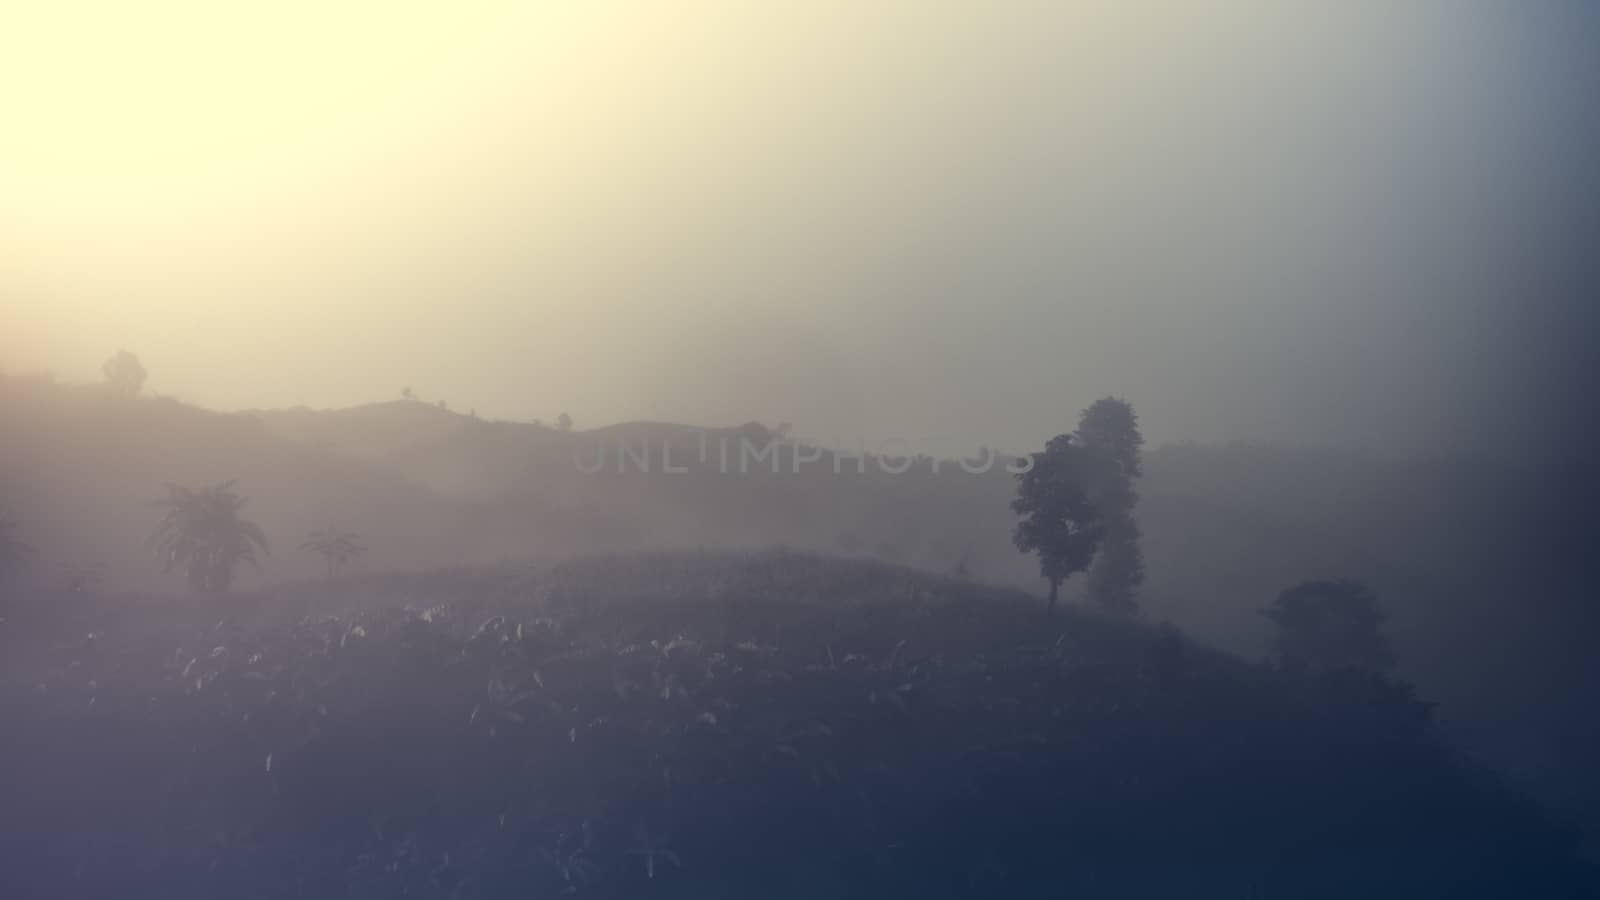 Landscape of forest and mountains among mist